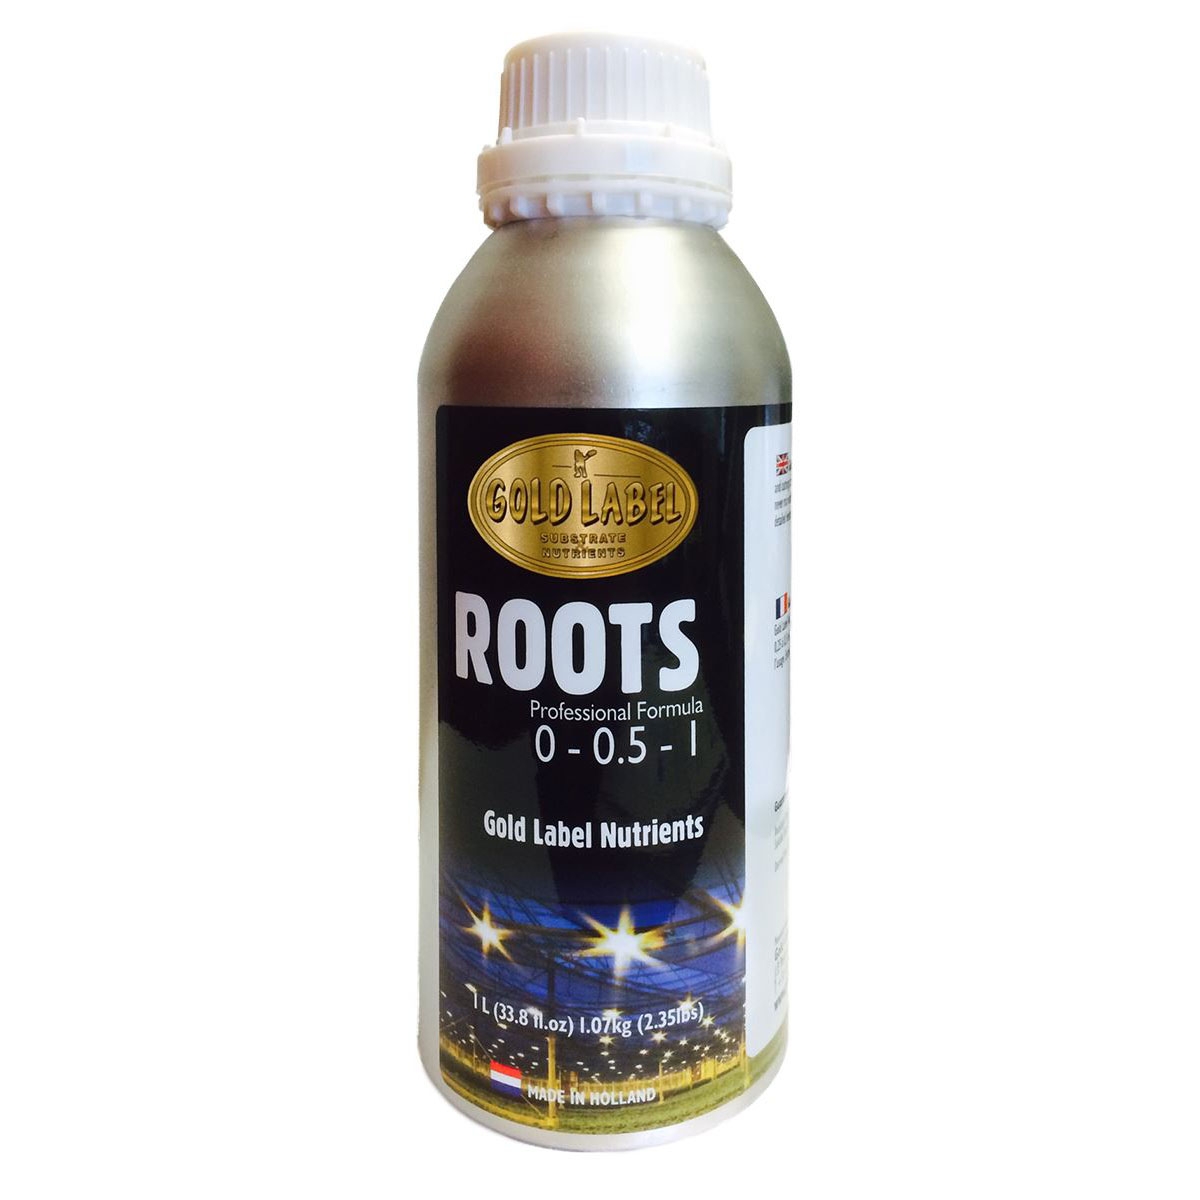 Roots by Gold Label